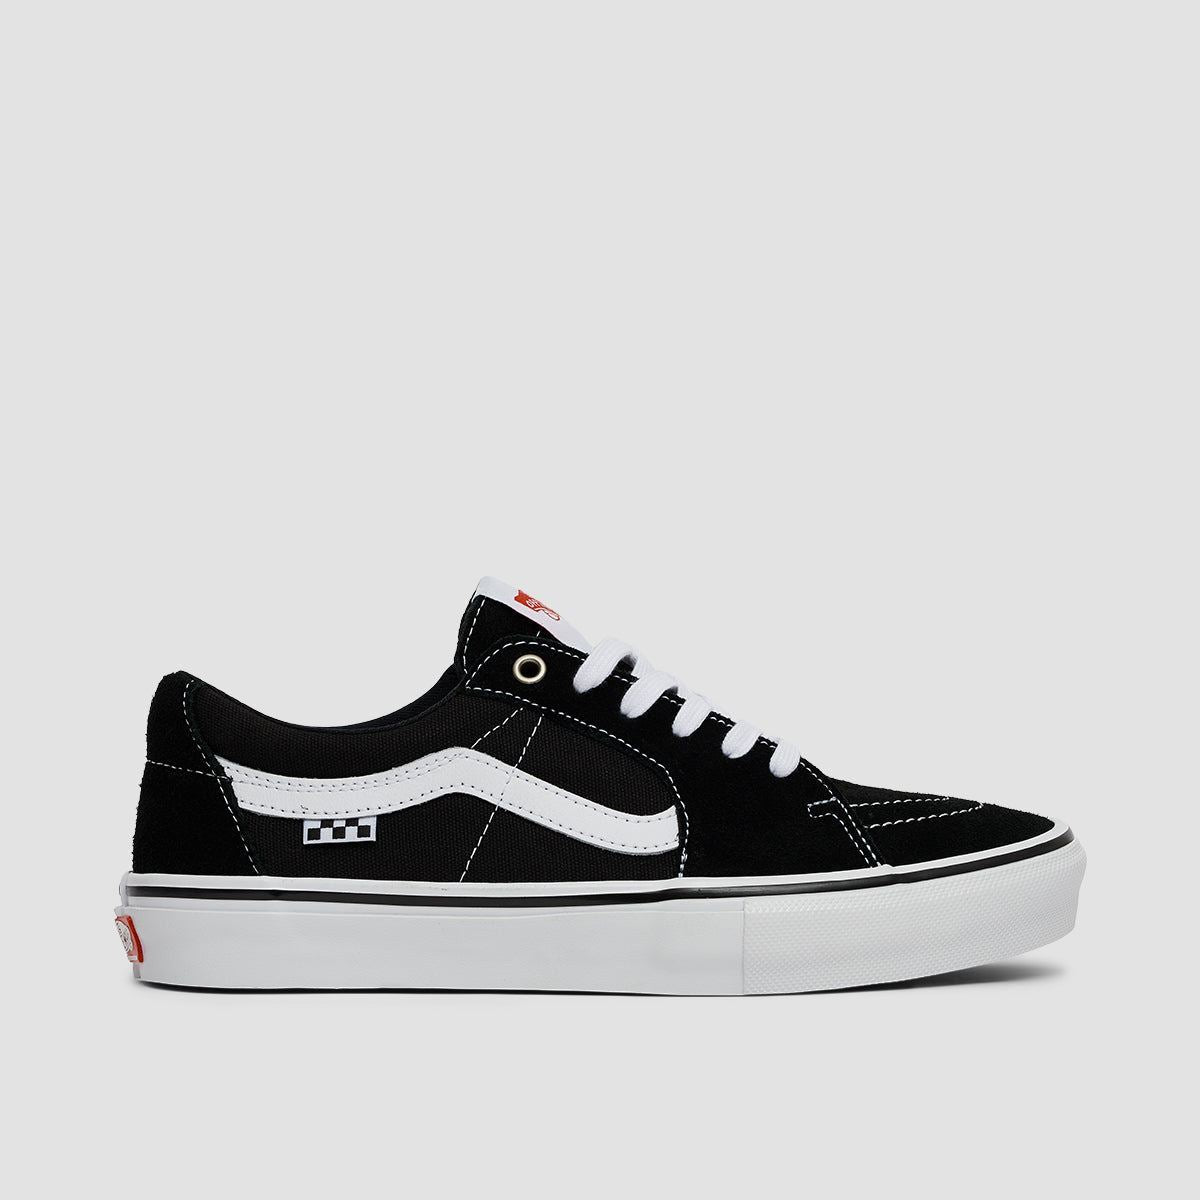 VANS CHUKKA LOW Denim Black Pewter White Size US 7 Men's New Rare  VN0A38CGRY8 $19.99 - PicClick